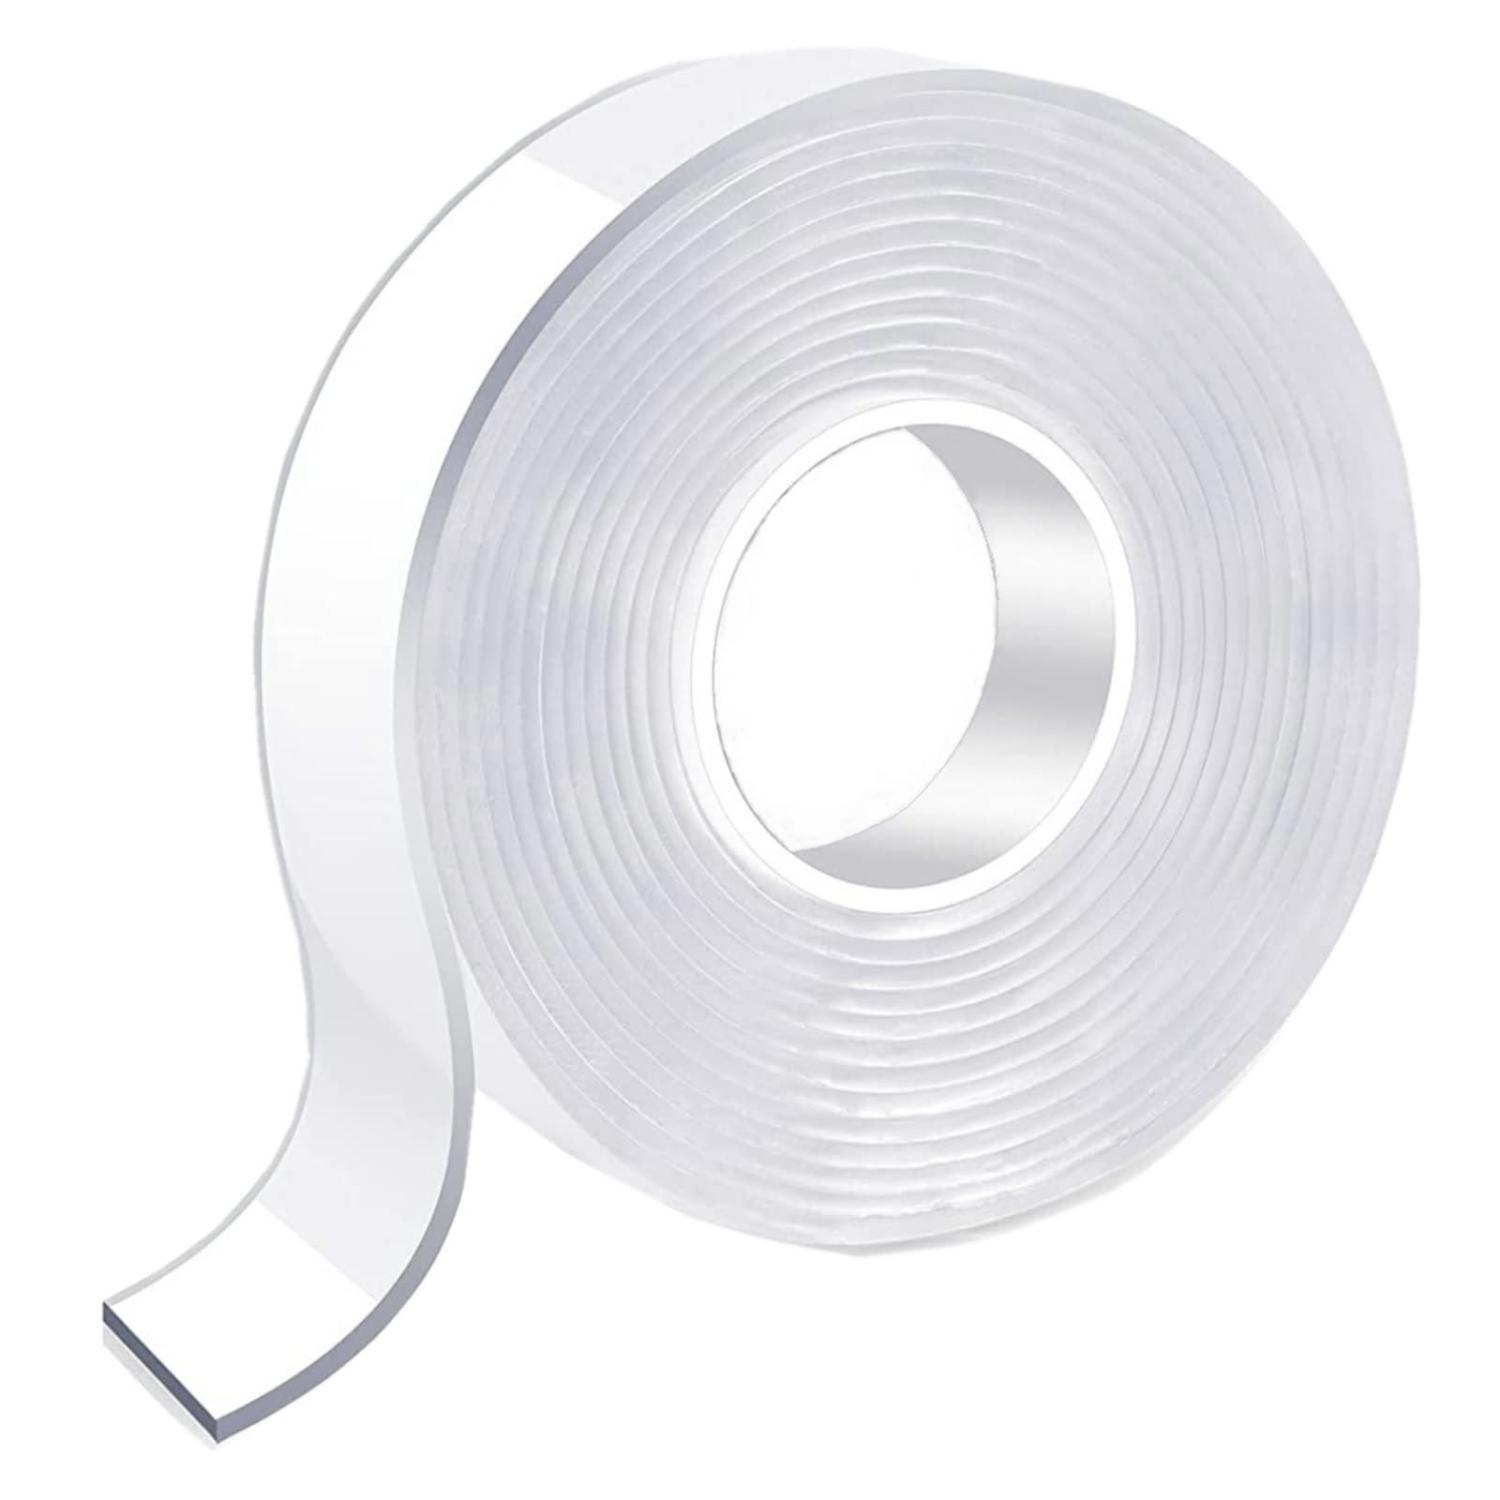 Double Sided Tape For Walls - Multipurpose Removable Mounting Adhesive Tape